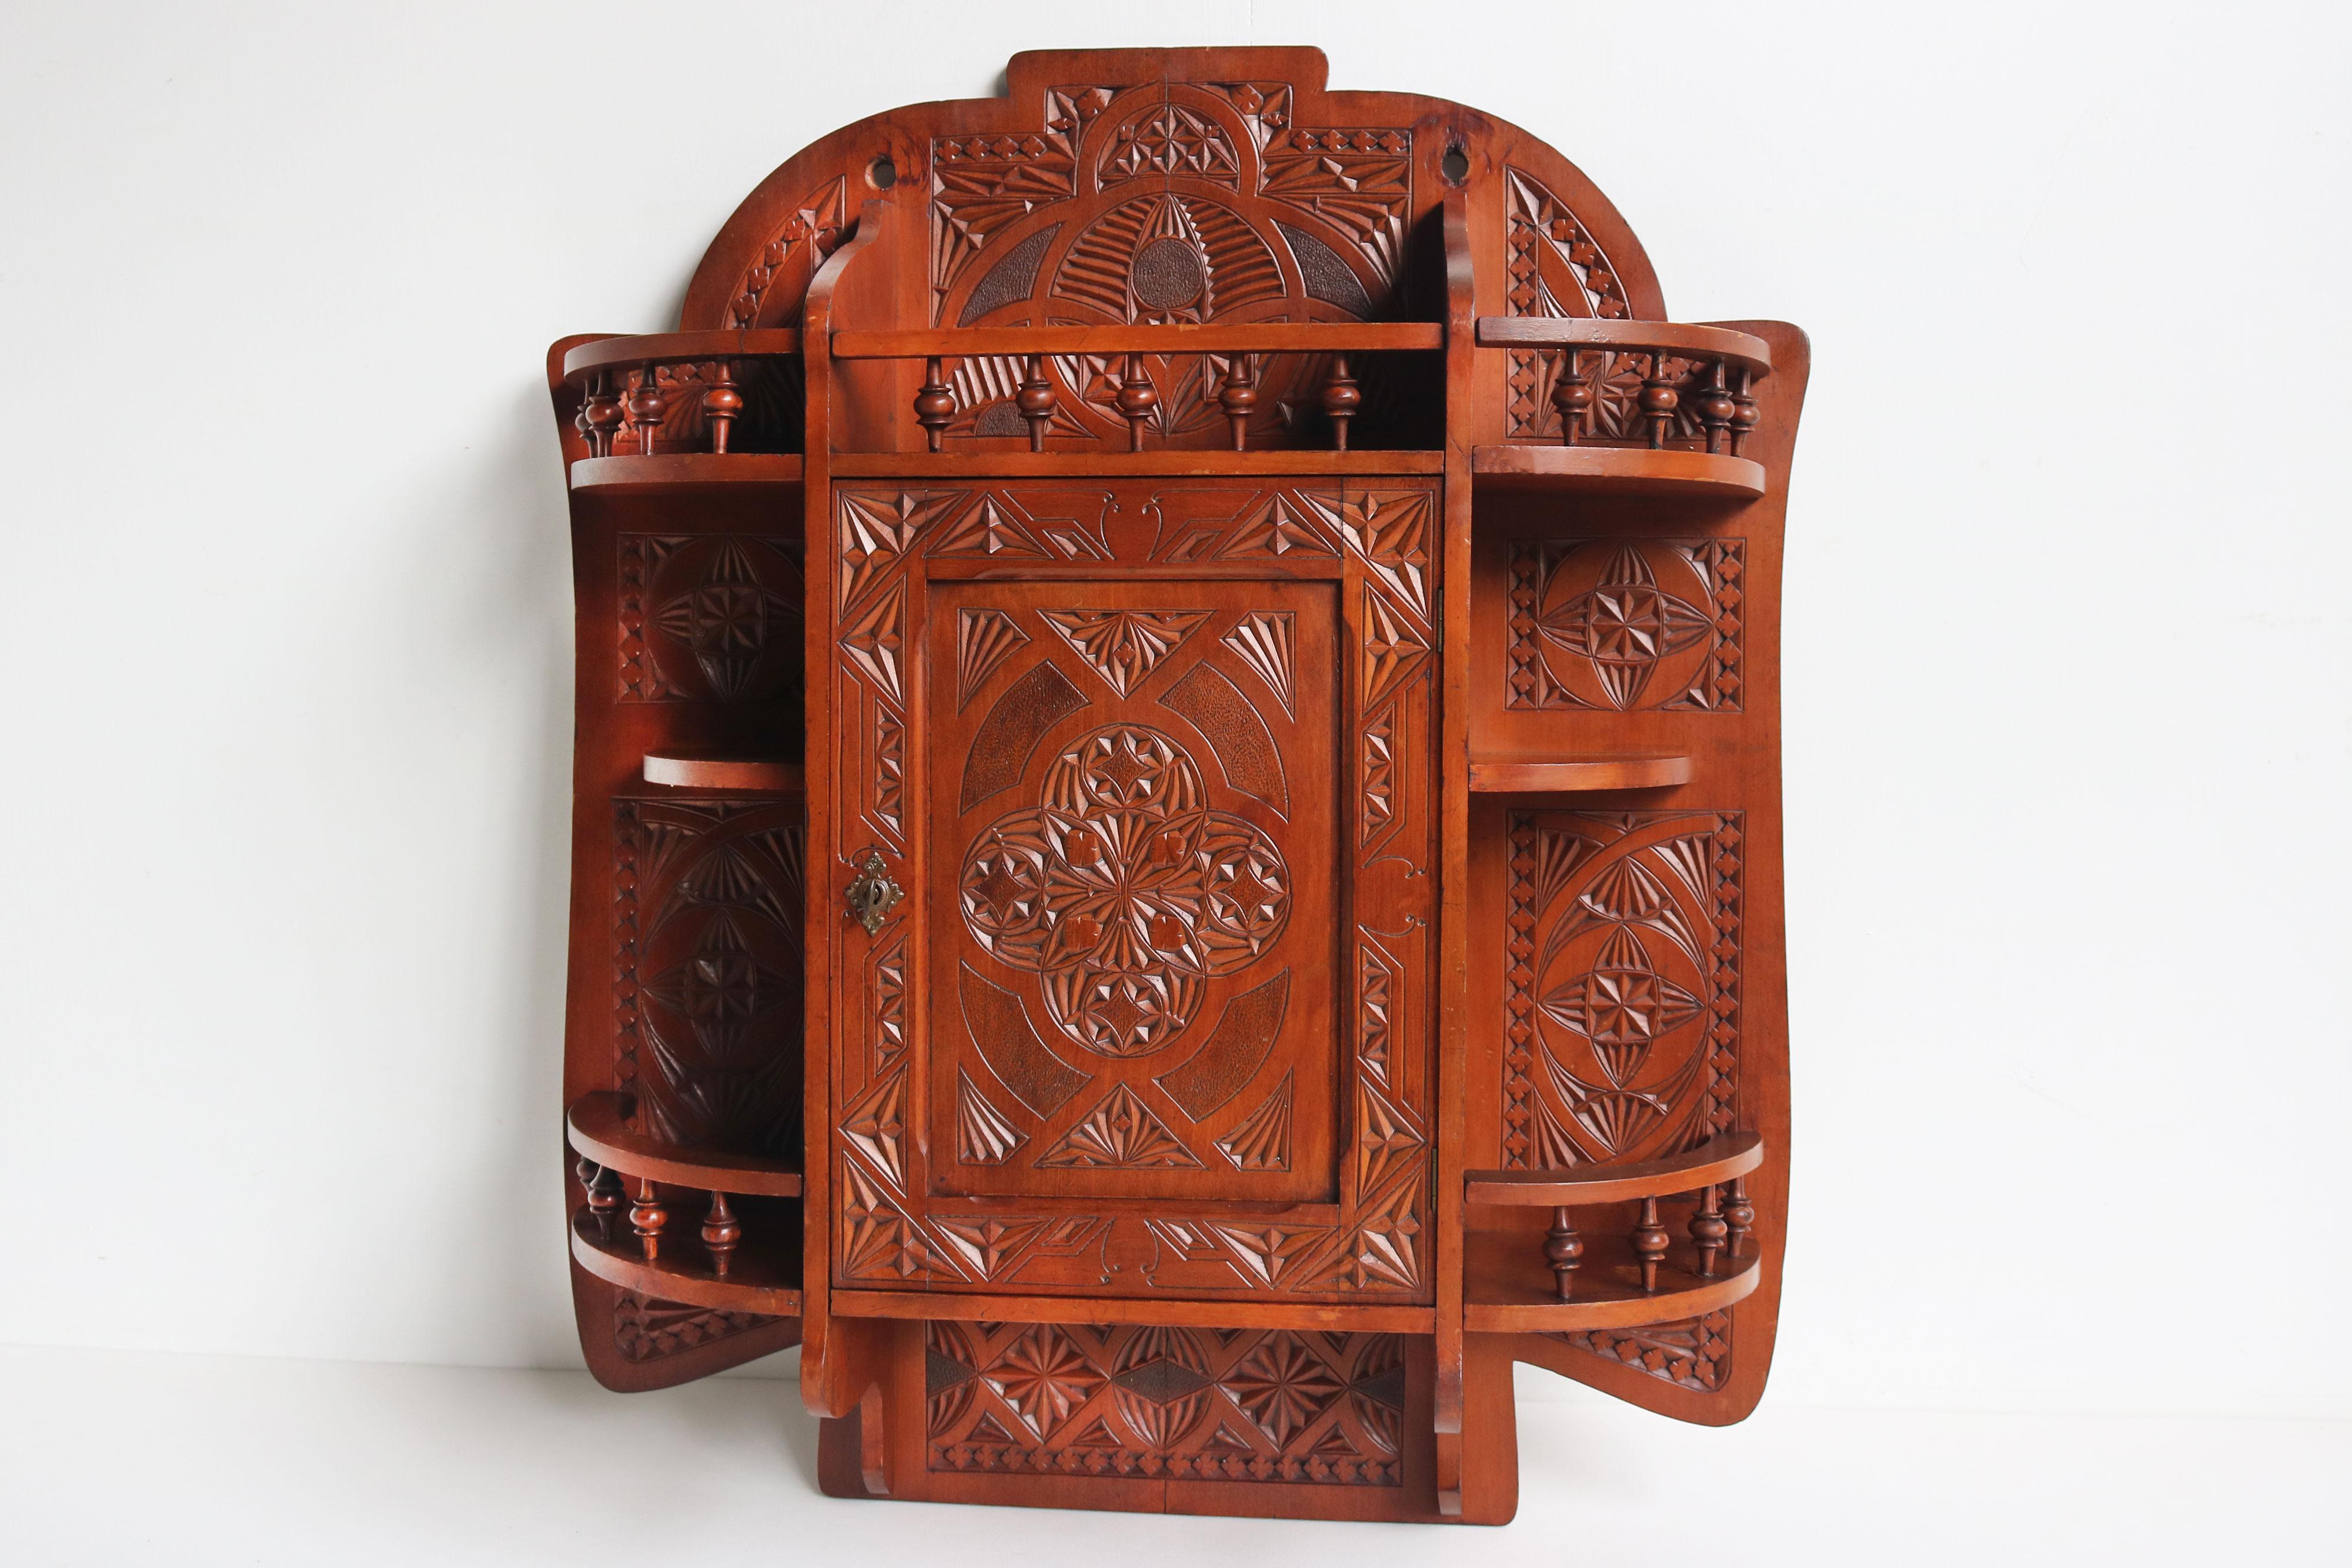 Introducing this stunning chip carved wall cabinet! Handcrafted with a traditional Dutch chip carving technique, this beautiful piece adds warmth and charm to any room. The intricate design and detail make it a true statement piece that catches the